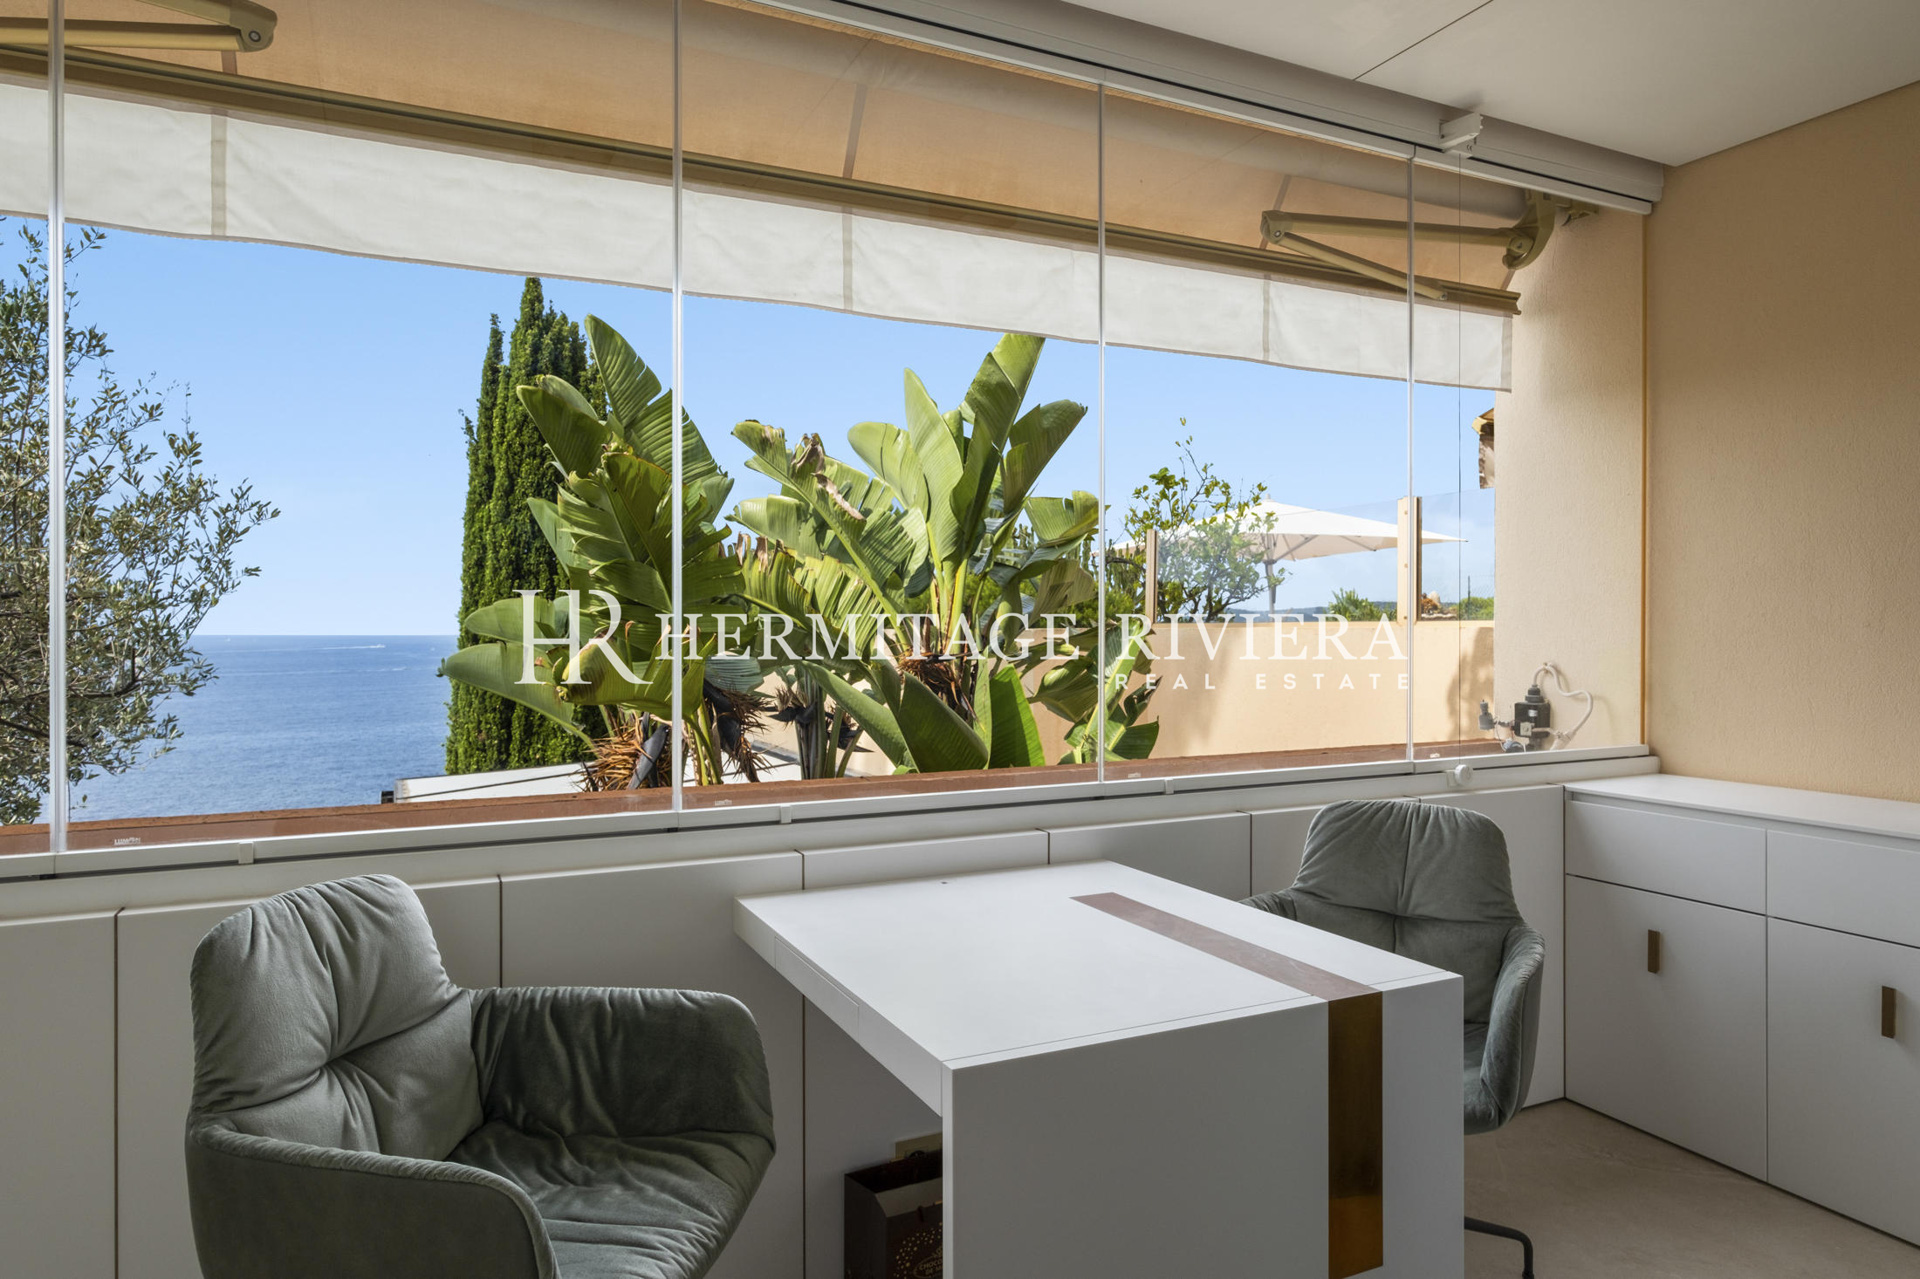 Duplex-apartment in luxury residence close waterfront  (image 10)